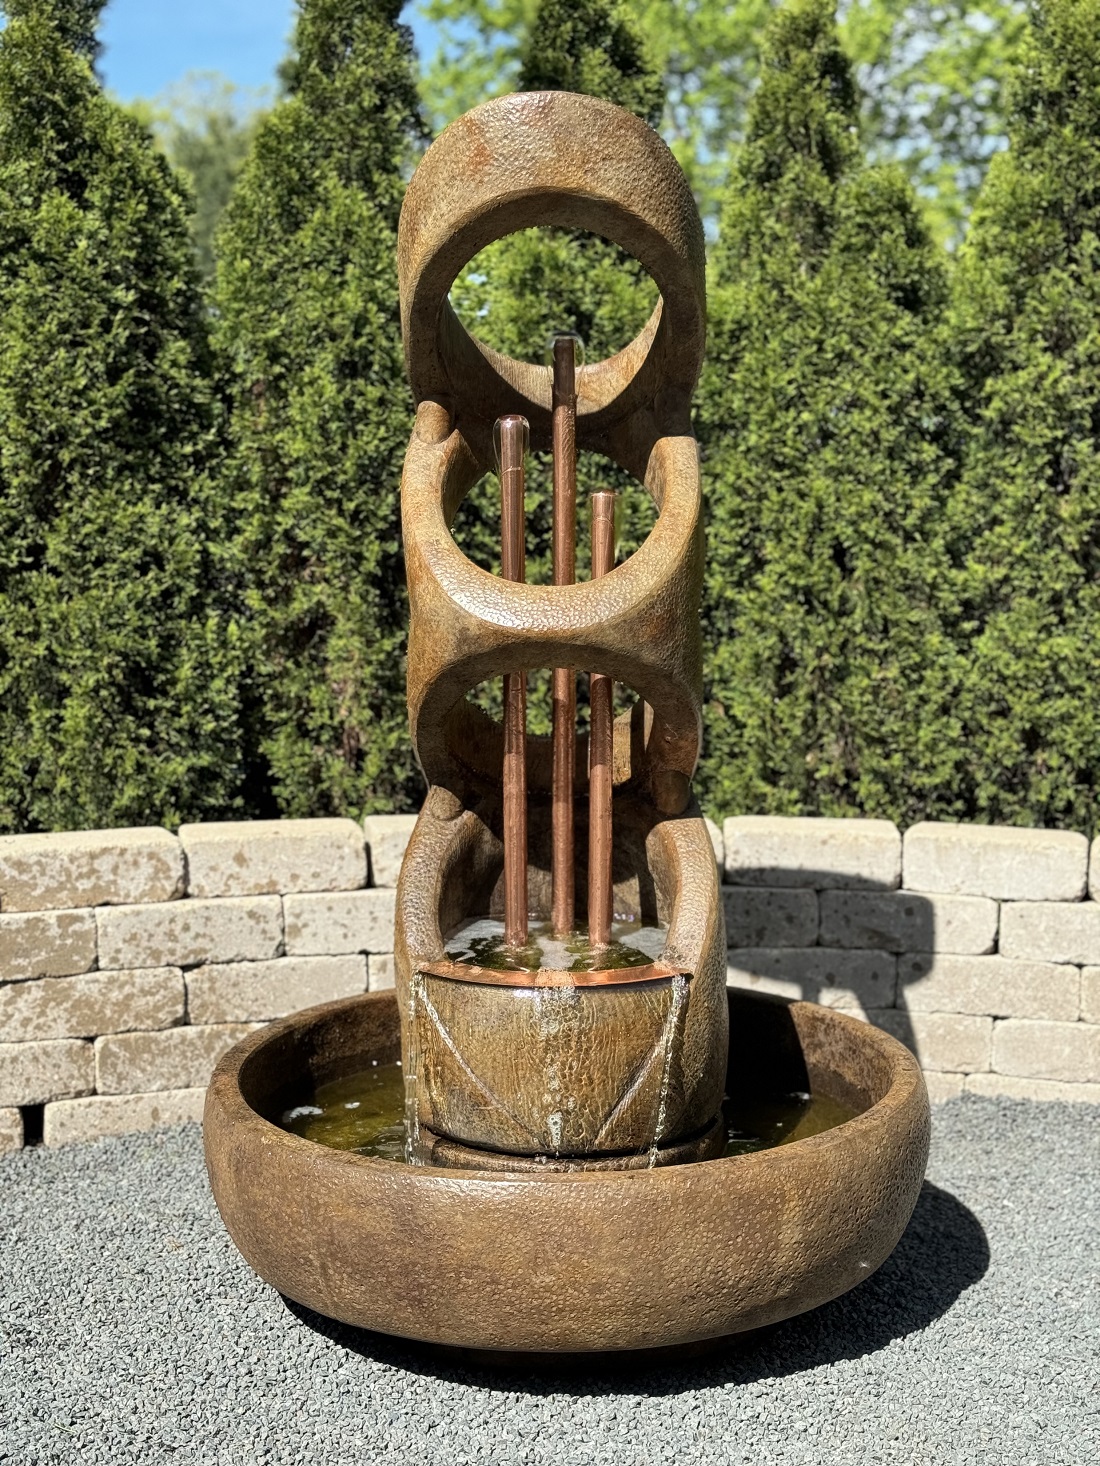 Balancing Rings Fountain with Copper Pipes